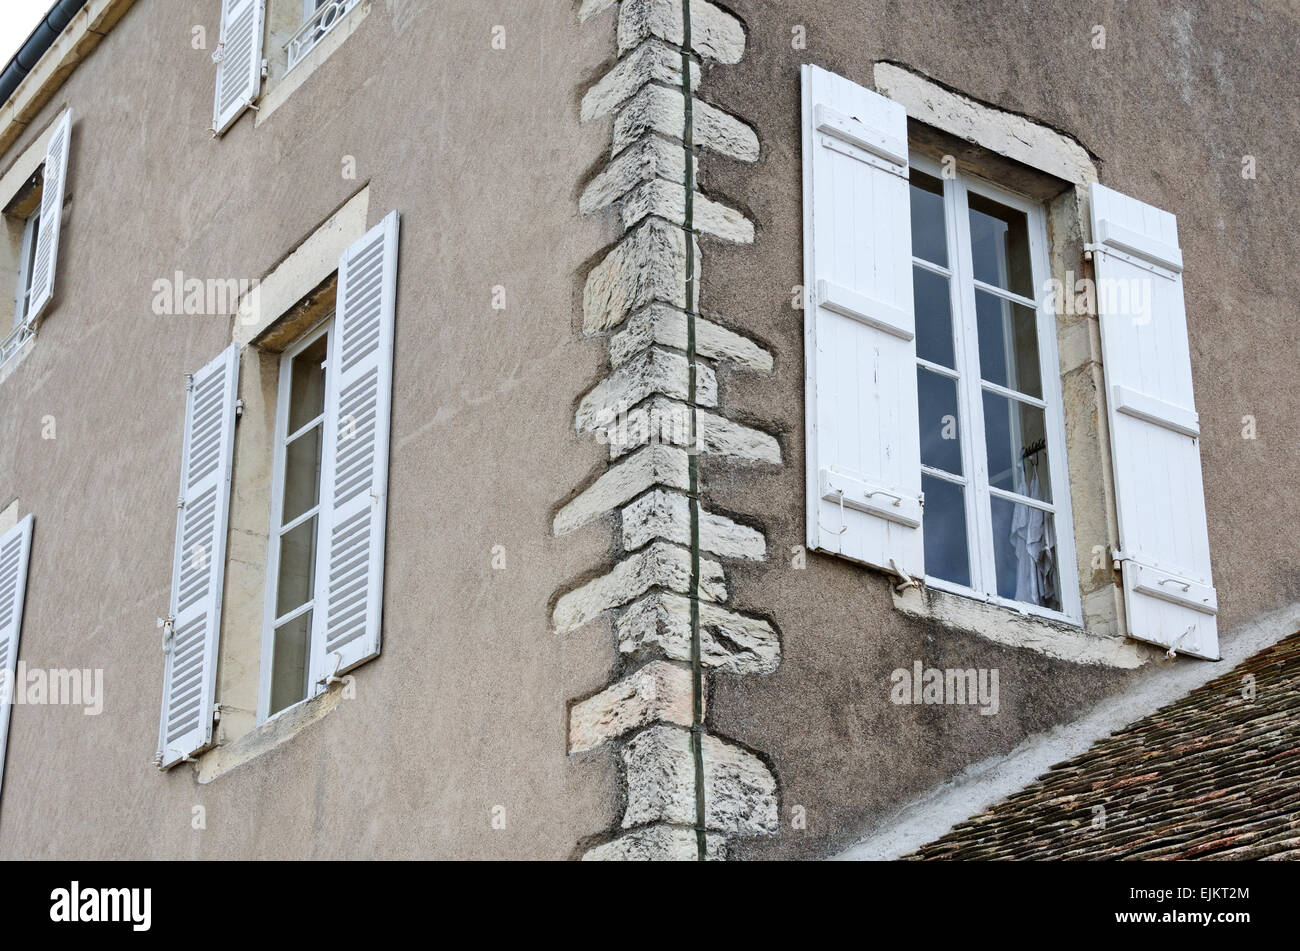 A lovely example of quoining on the 16th century estate of Domaine de la Folie in Chagny, Burgundy, France. Stock Photo